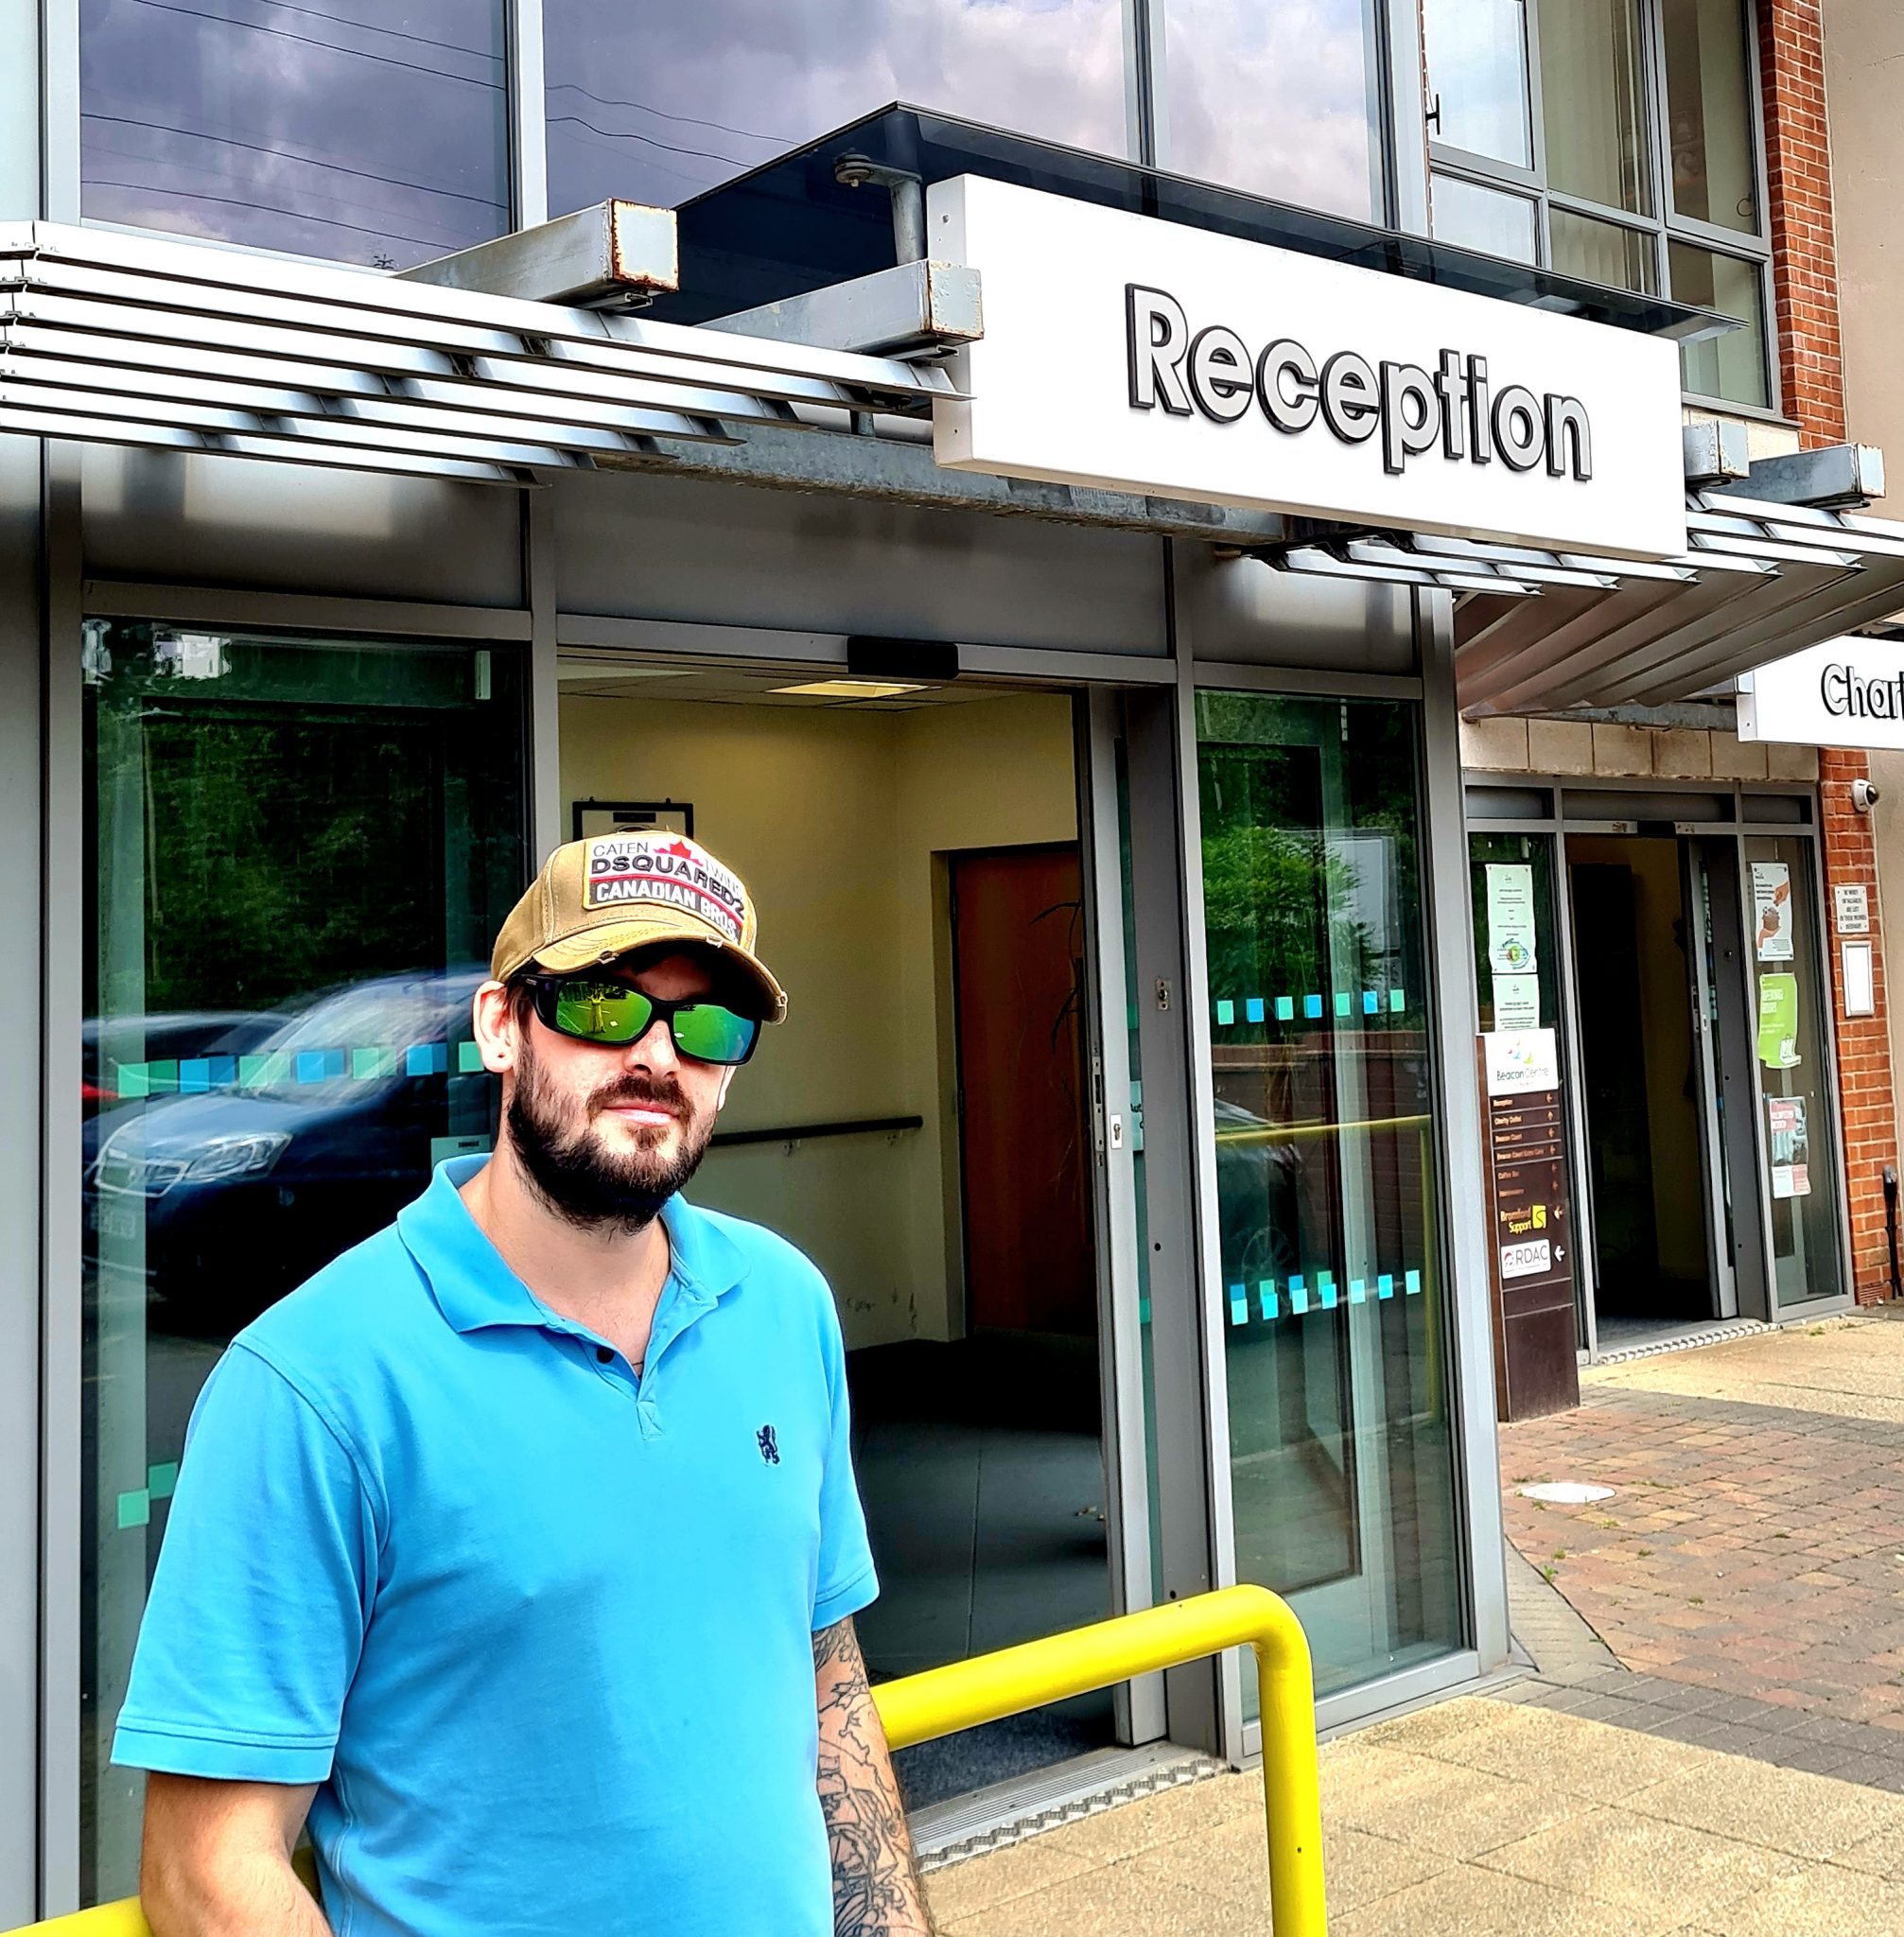 This shows our sight loss advisor Nathan, outside our centre in jeans, a blue polo shirt, a cap and of course, sunglasses!